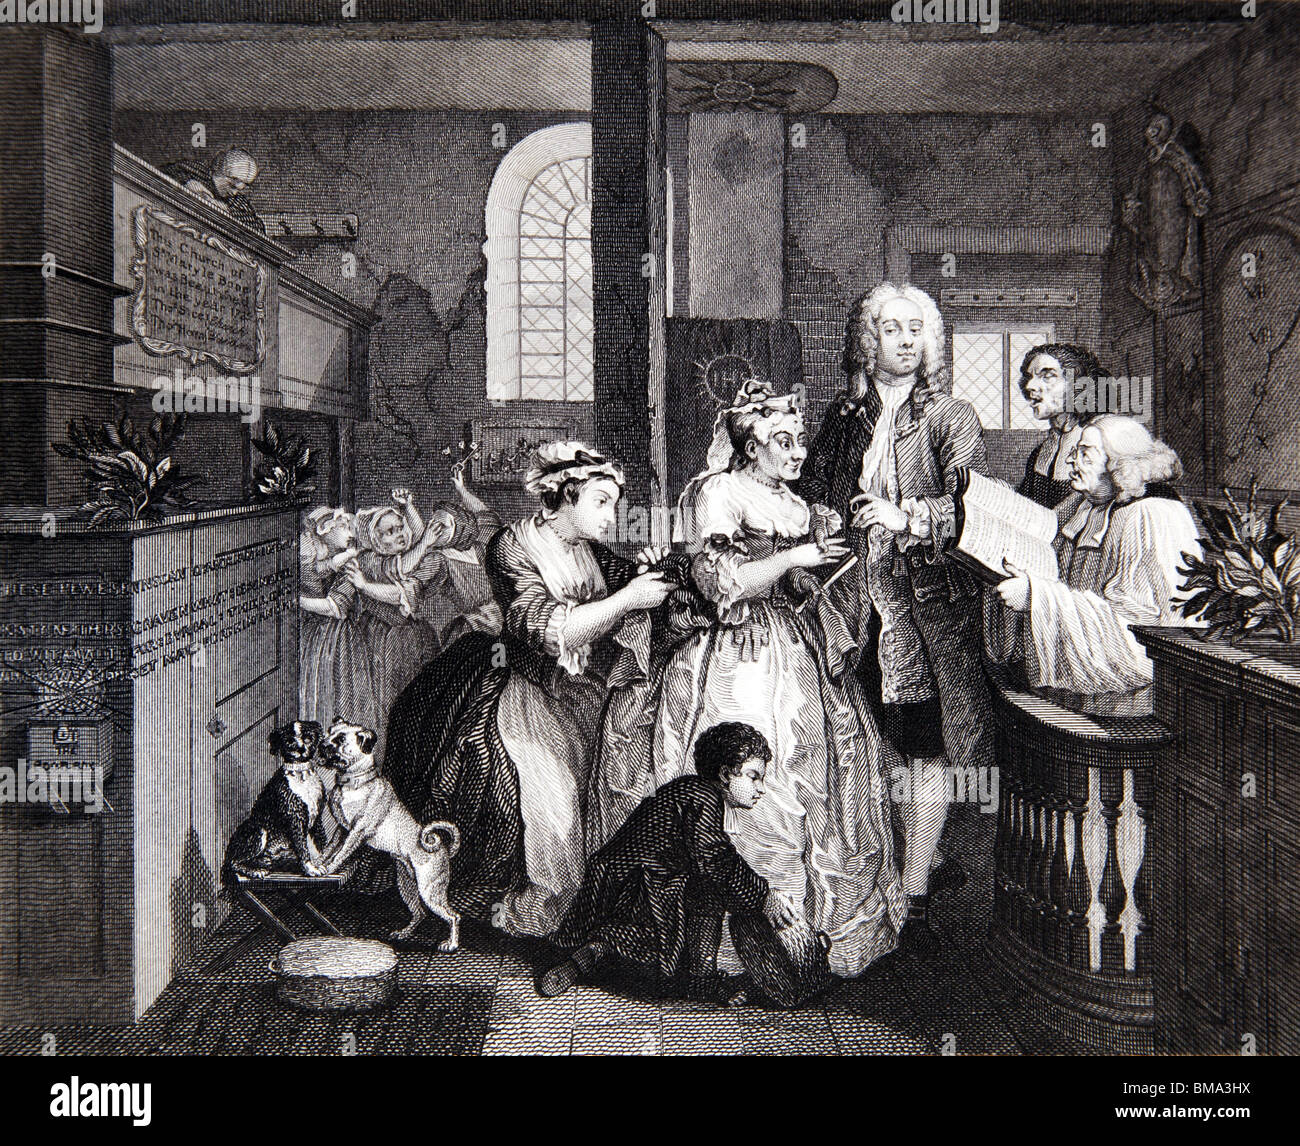 Black and White Engraving from an original by William Hogarth b1697, d1764 from The Rake's Progress; Marrying an Old Maid Stock Photo